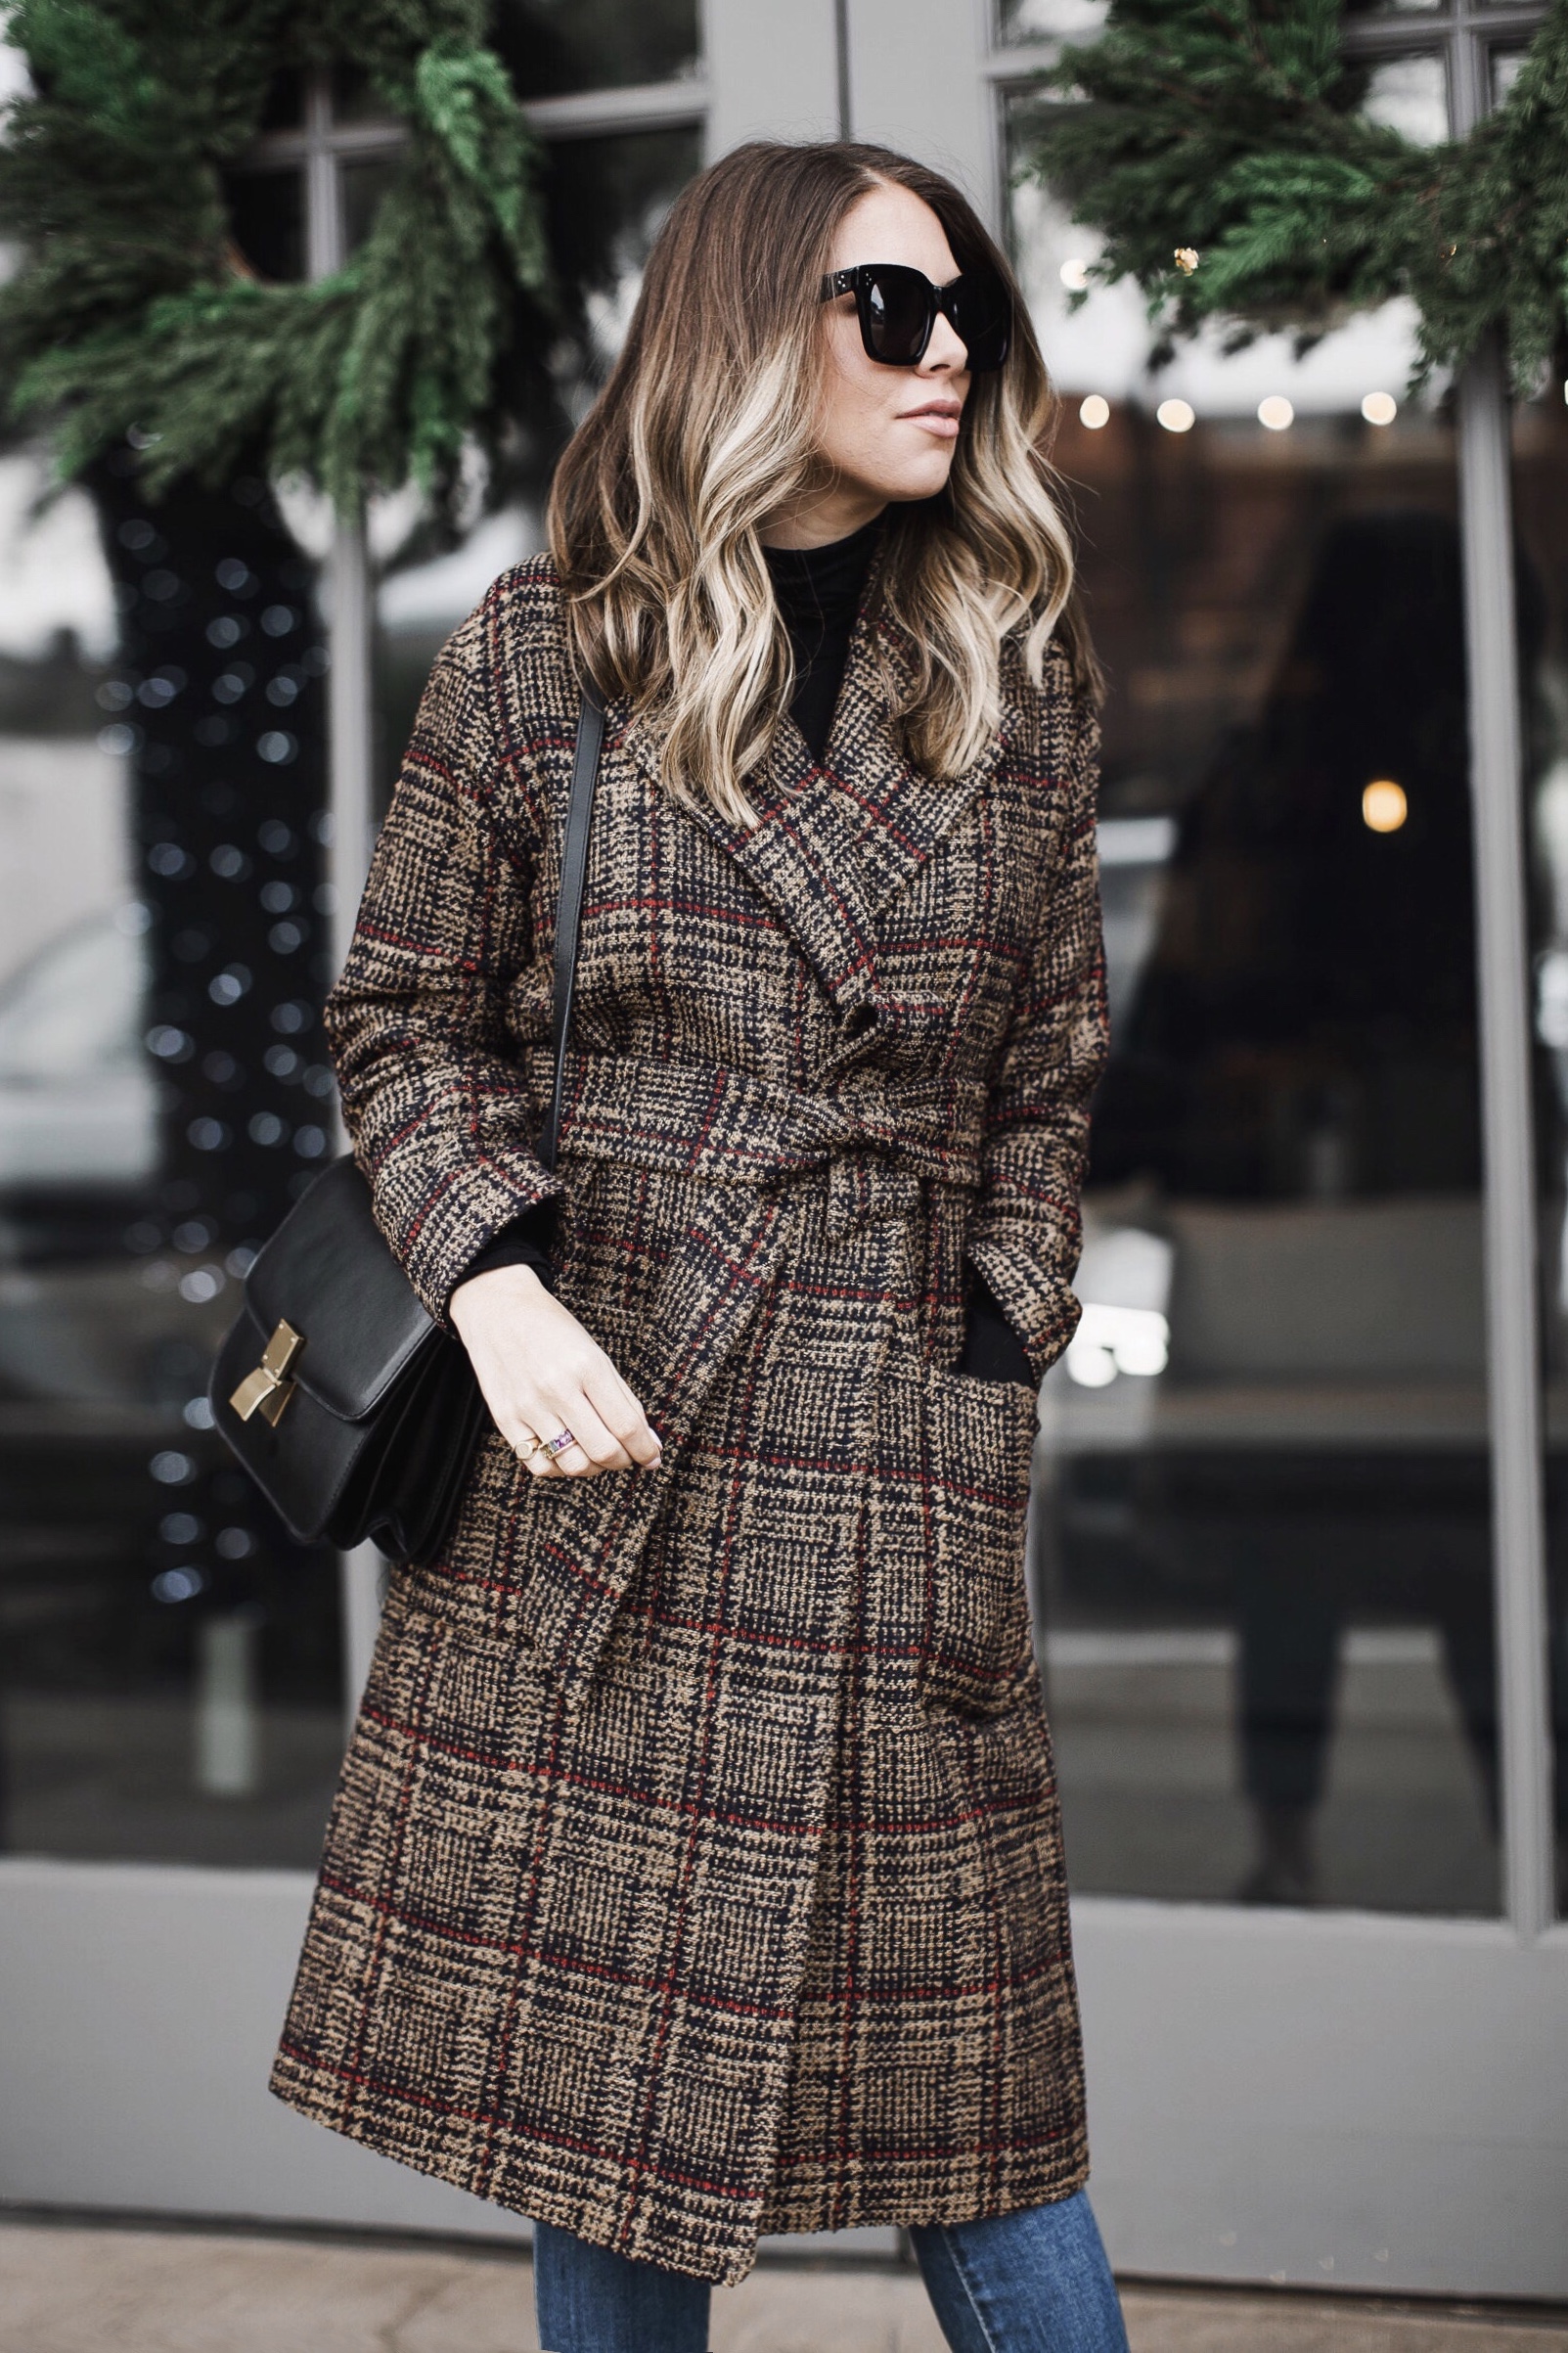 Holiday Plaid and Other Festive Trends I'm Loving This Season | The ...